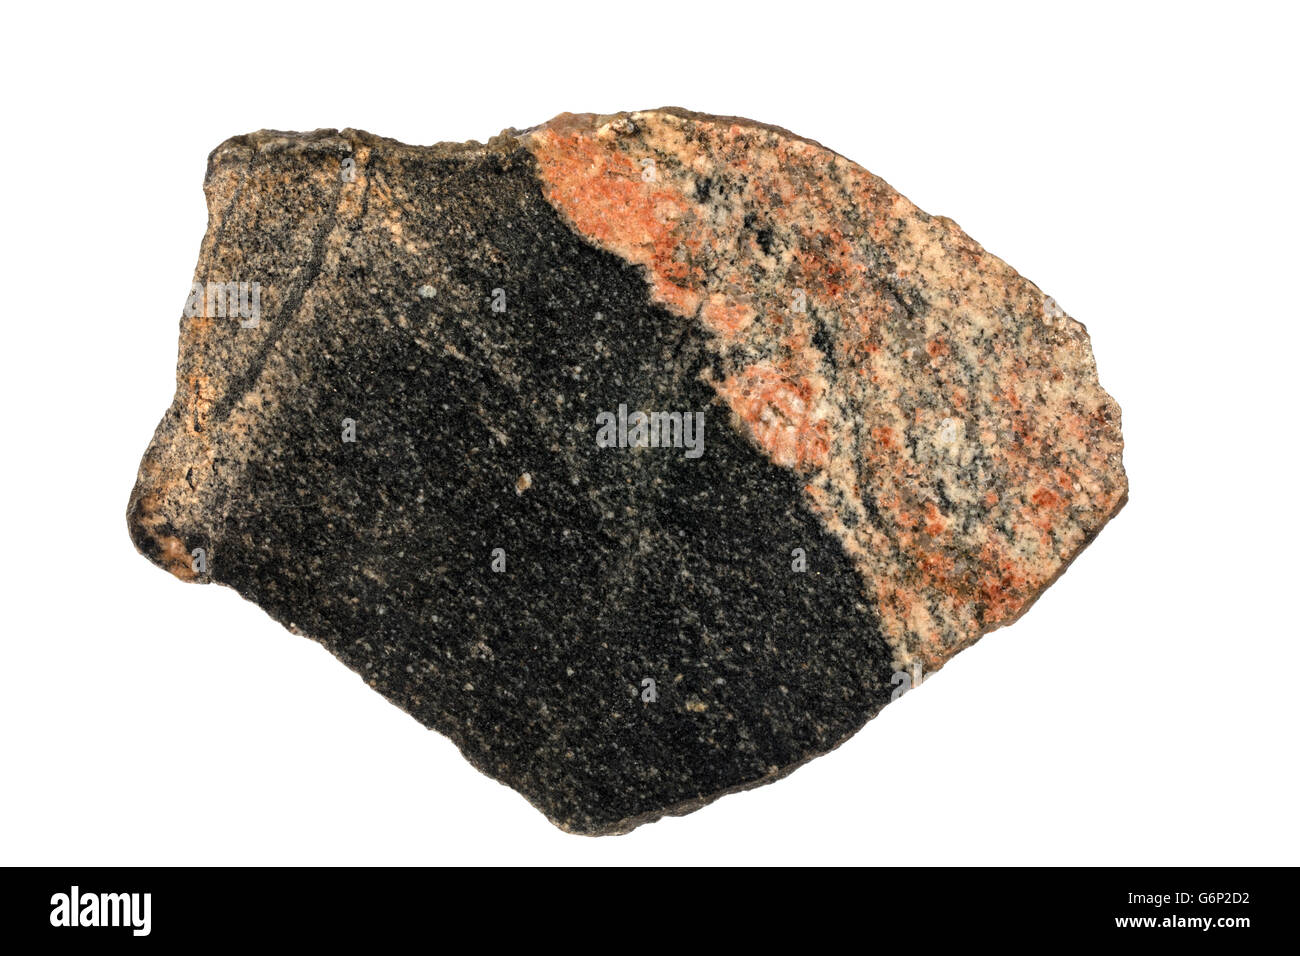 Acasta gneiss,  oldest known exposed crustal rock in the world, 4.03 billion years old, Northwest Territories , Canada, tonalite Stock Photo